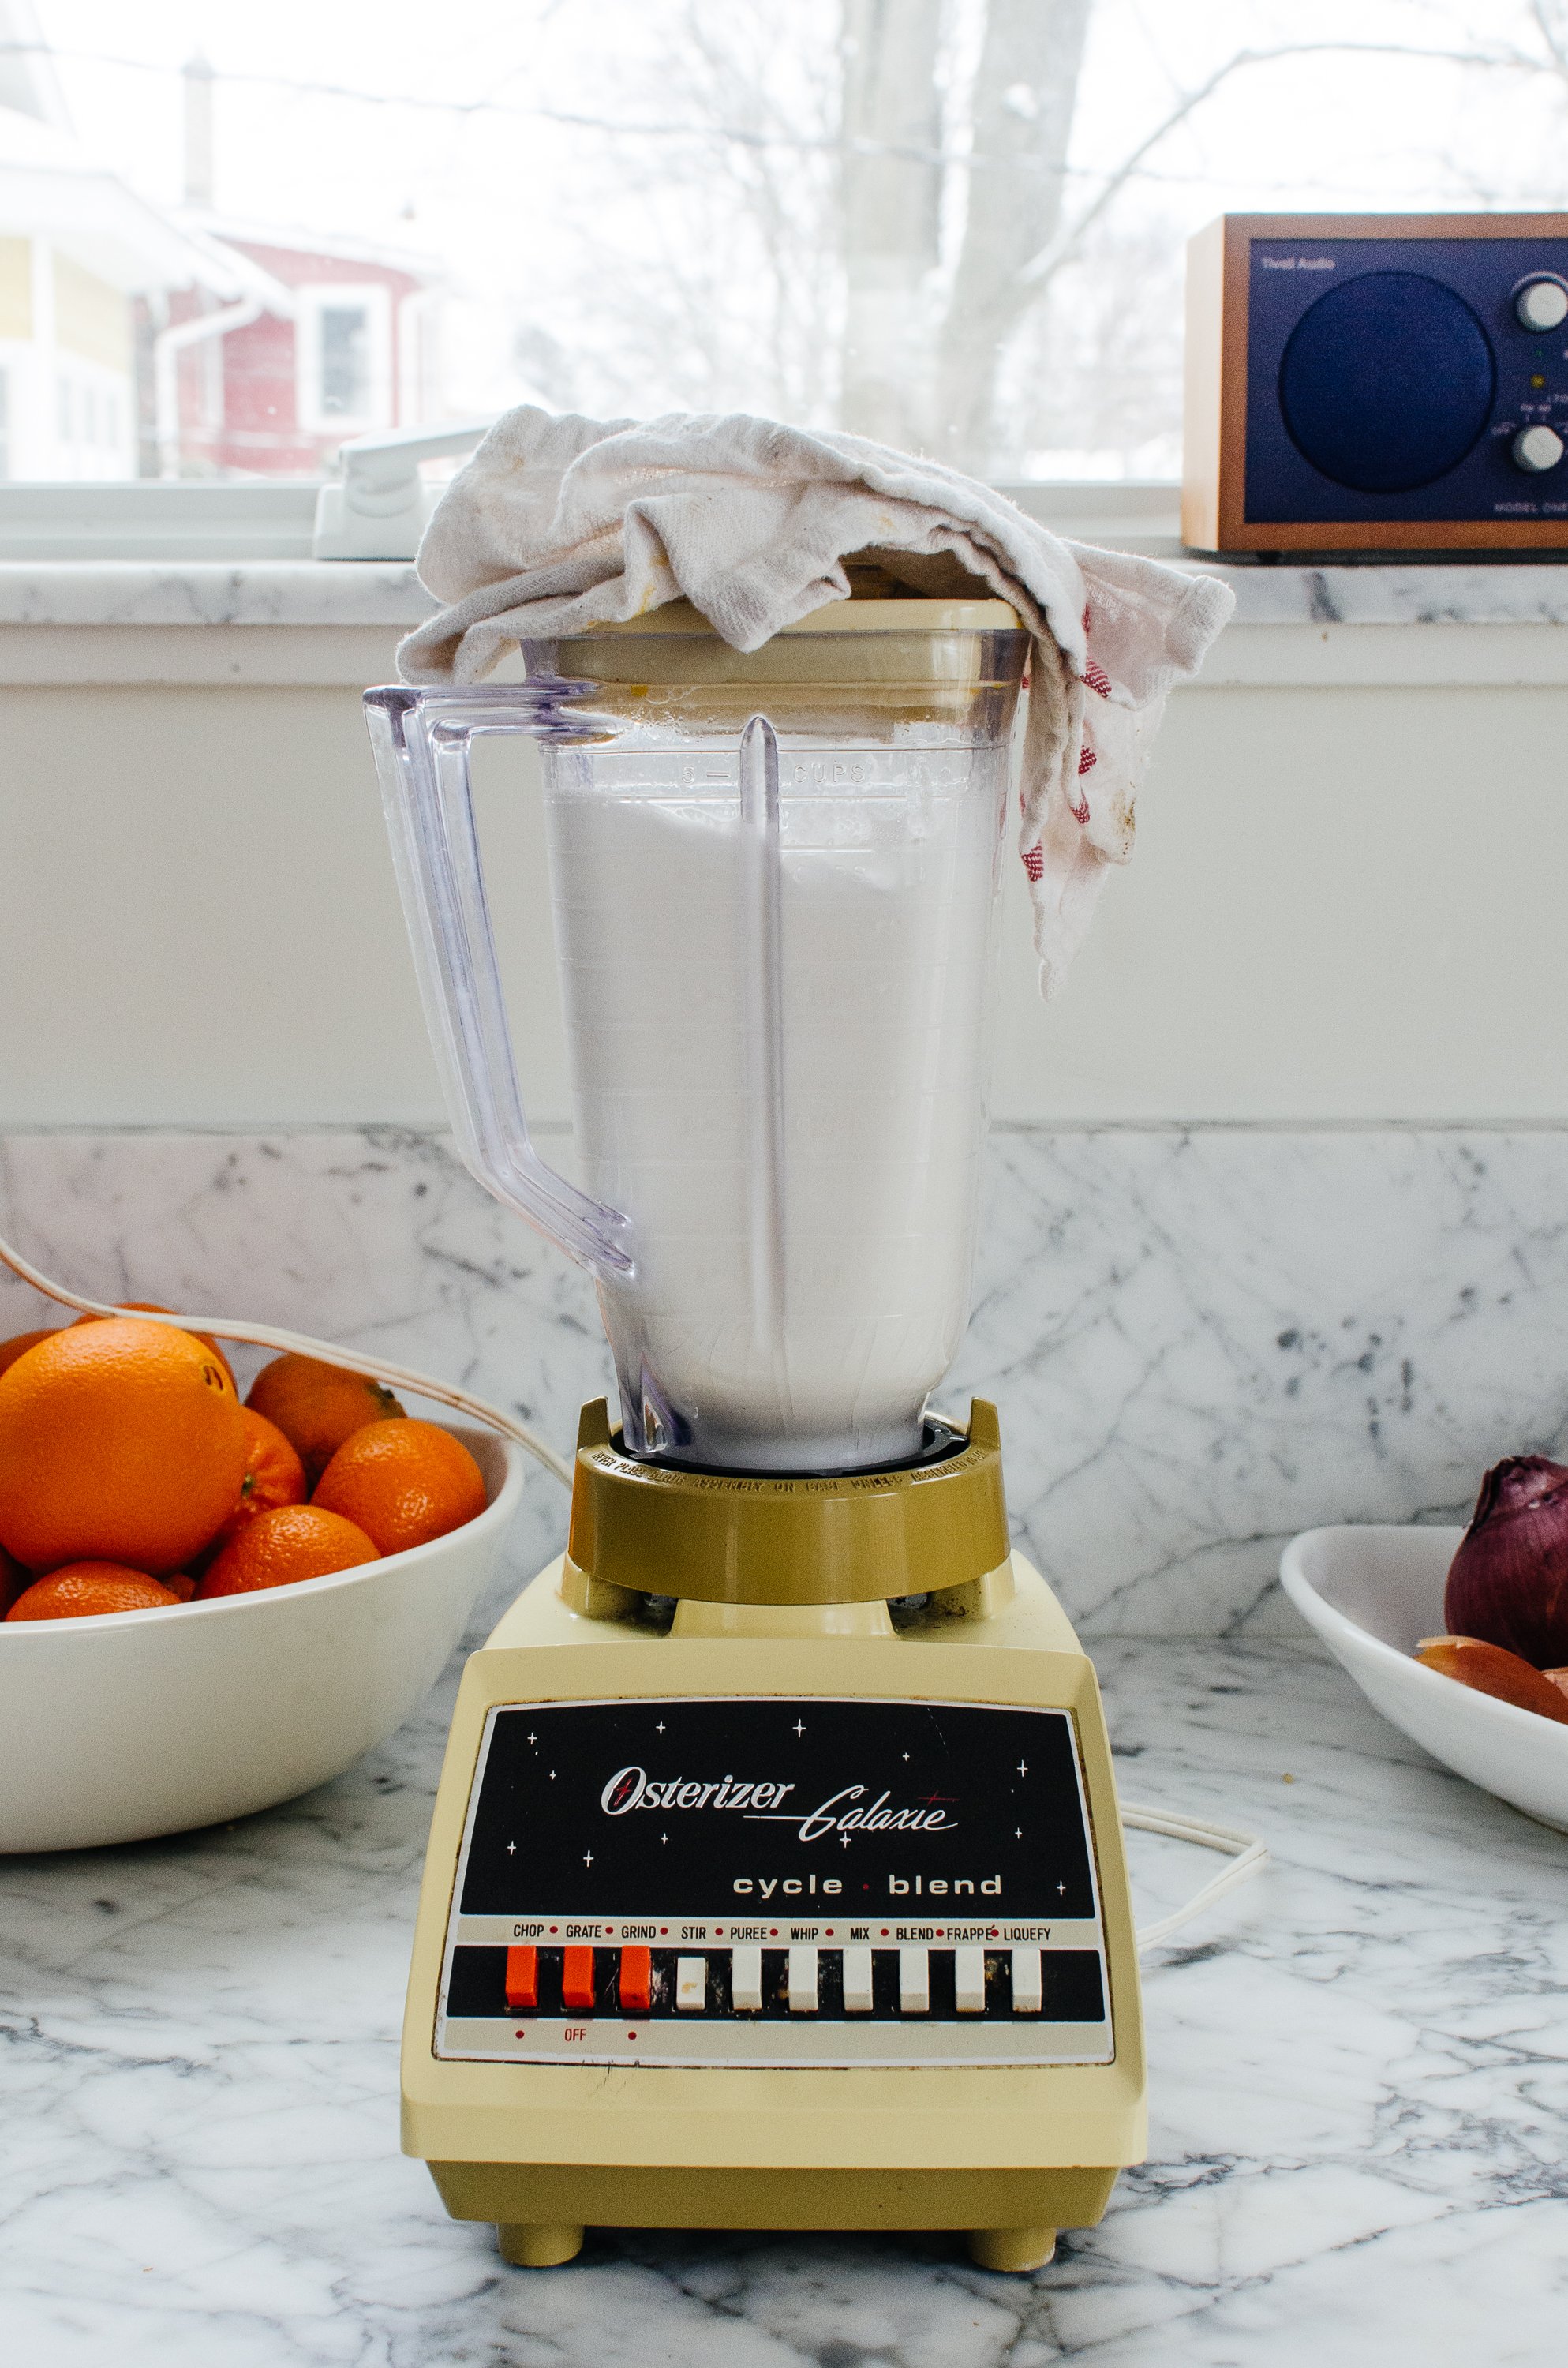 15 Foods You Should Avoid Putting In A Blender